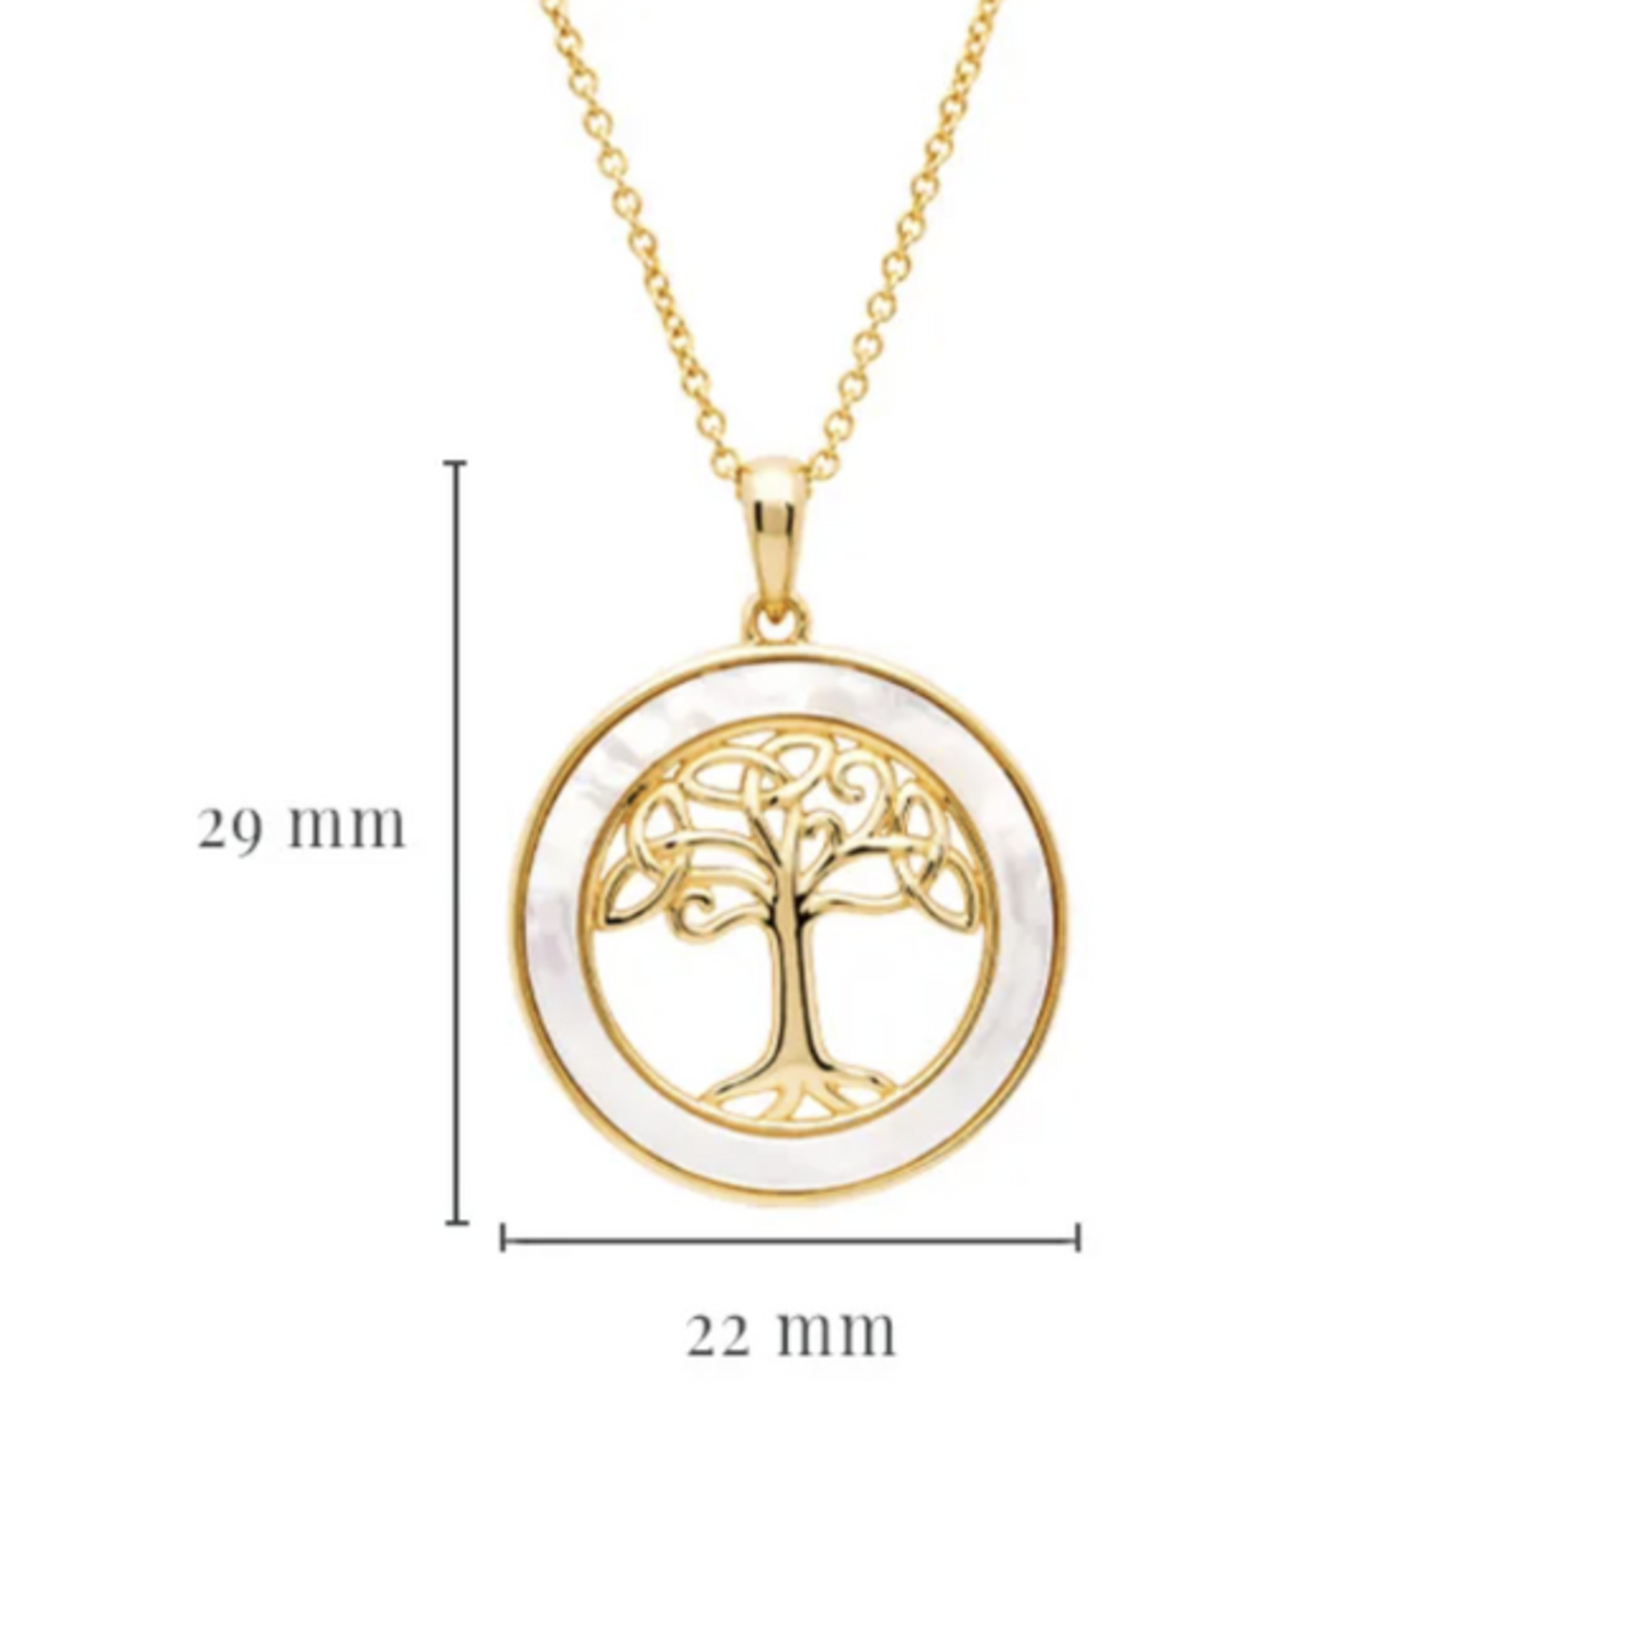 Shanore 14kt Gold Verm. Tree of Life Necklace w/ Mother of Pearl